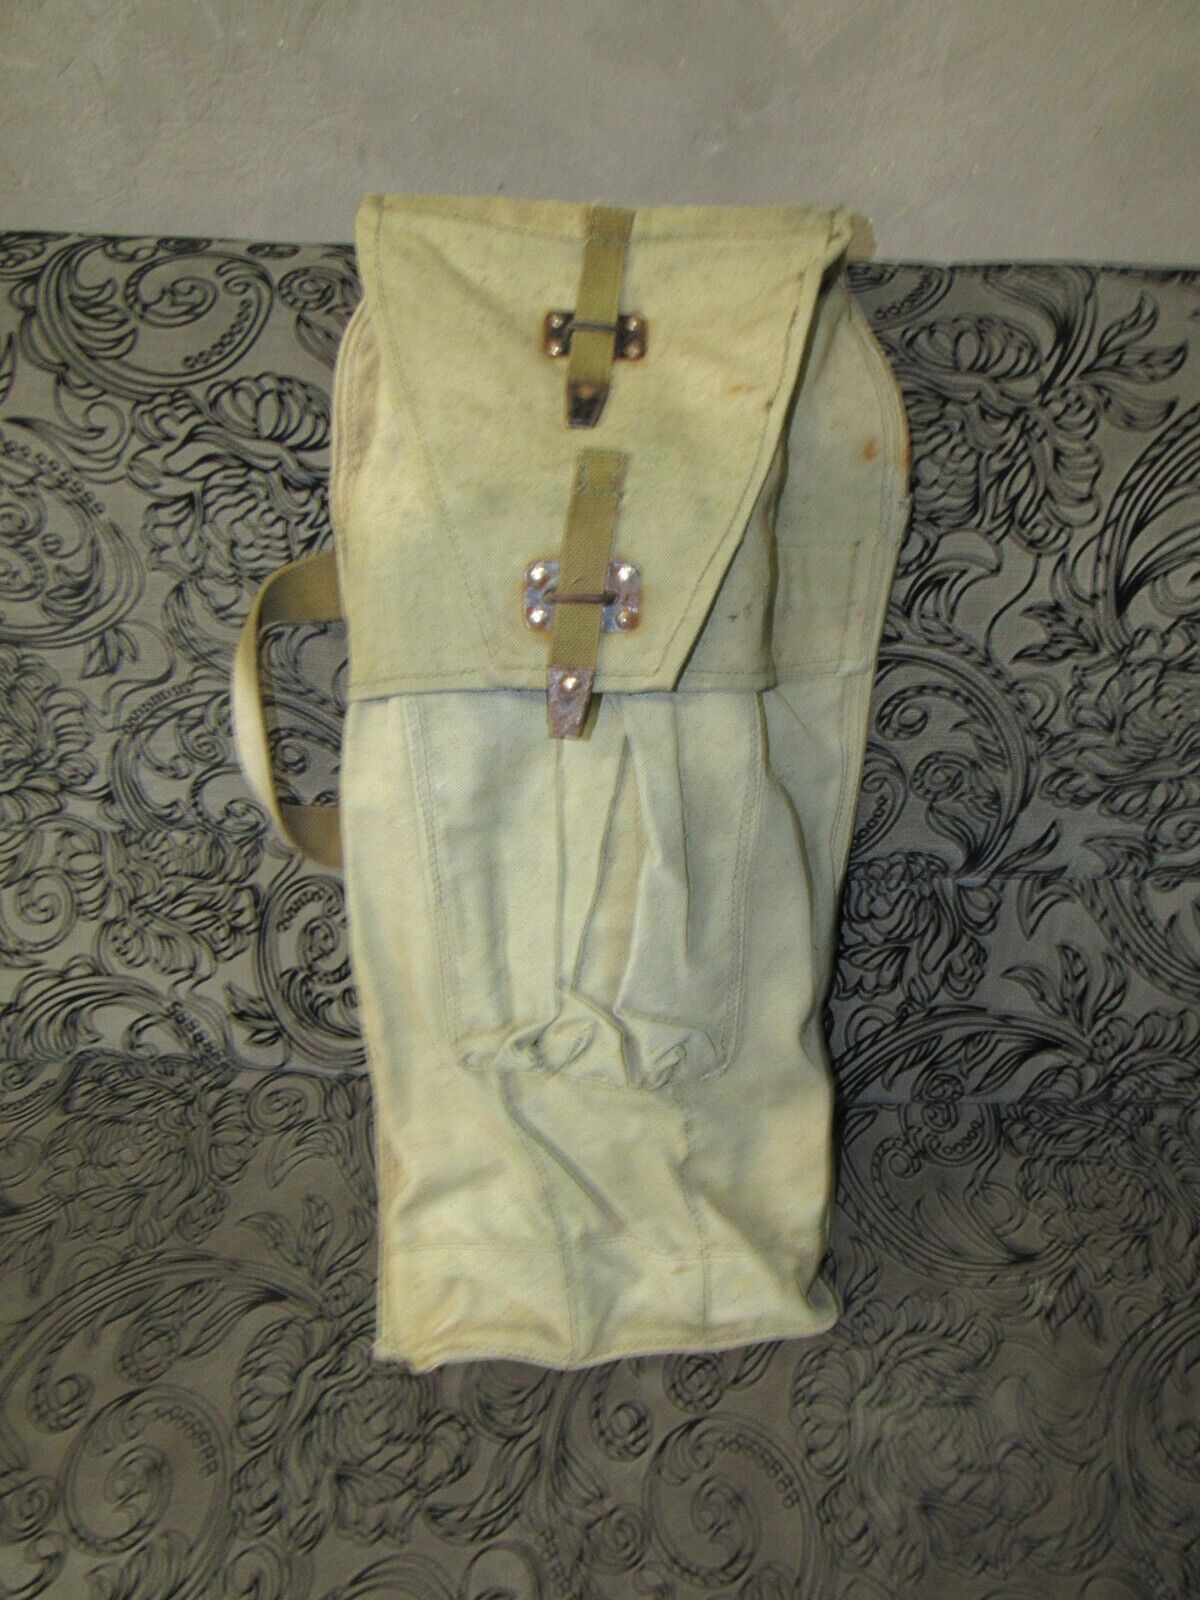 Soviet-Russian Army Backpack Airborne Forces Afghanistan war (1)